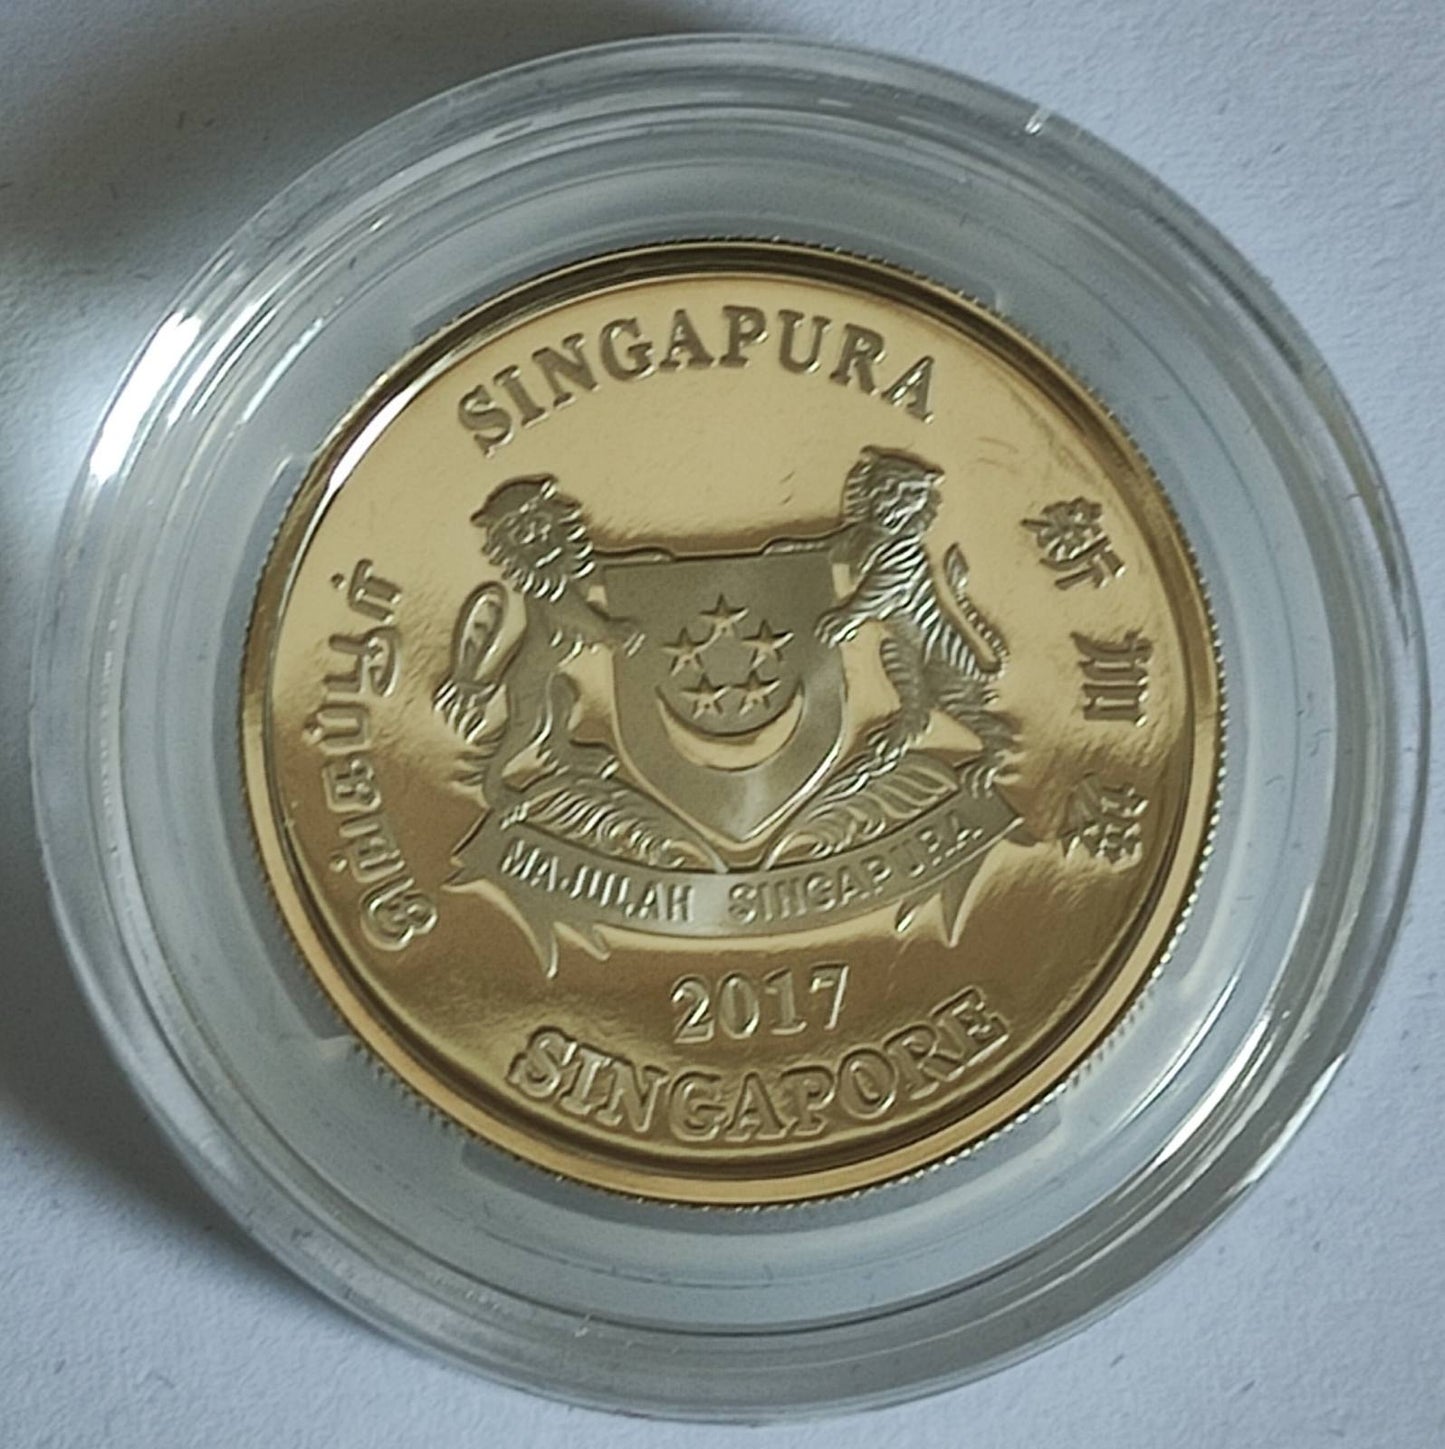 2017 Singapore Lunar Rooster 1/4 oz Prooflike Silver Coin in Capsule with Case and COA